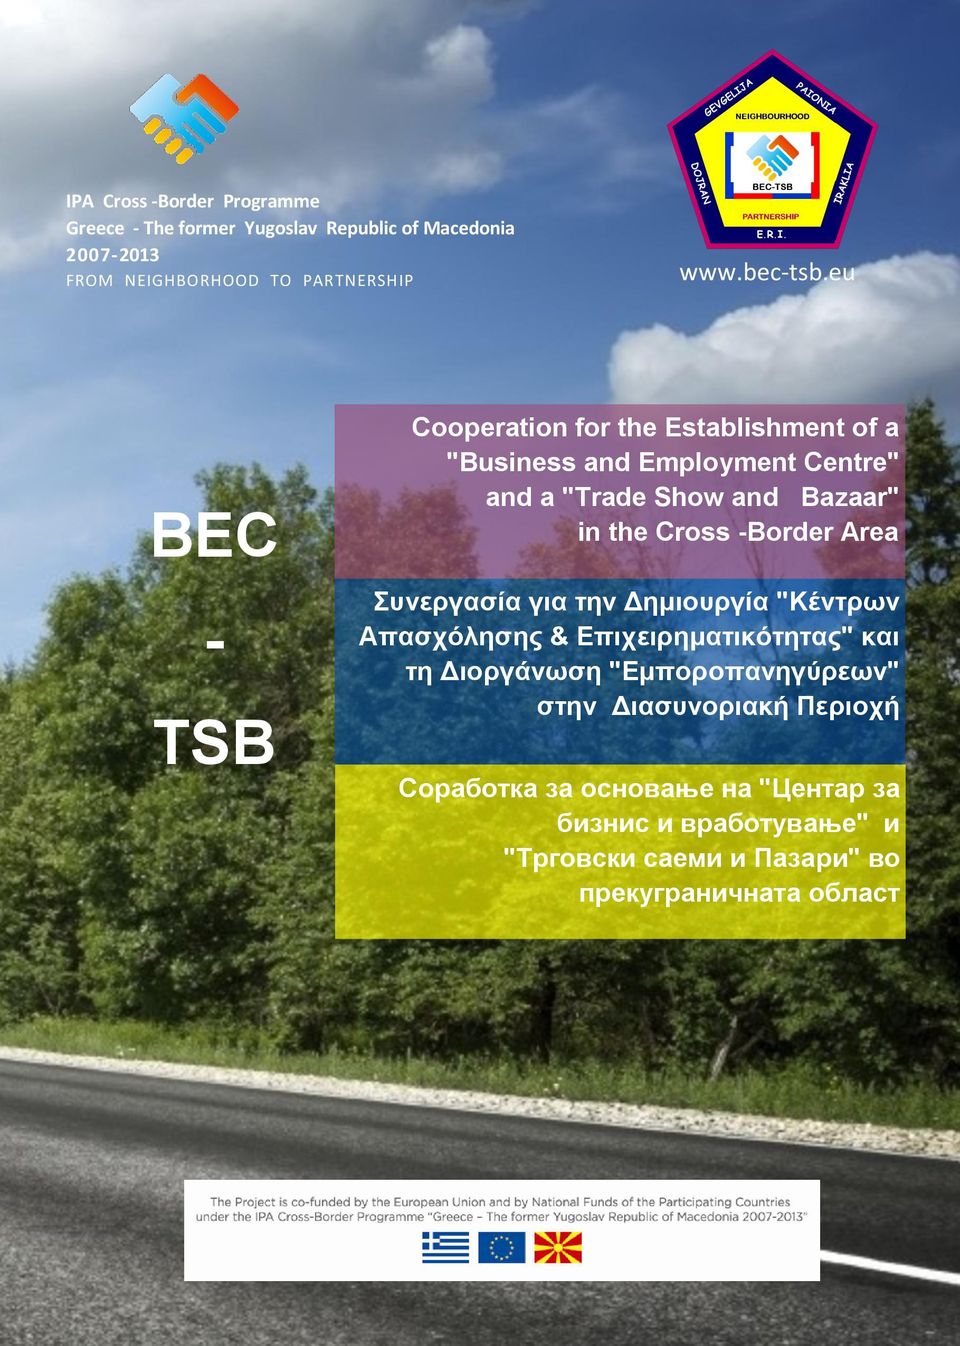 eu BEC - TSB Cooperation for the Establishment of a "Business and Employment Centre" and a "Trade Show and Bazaar" in the Cross